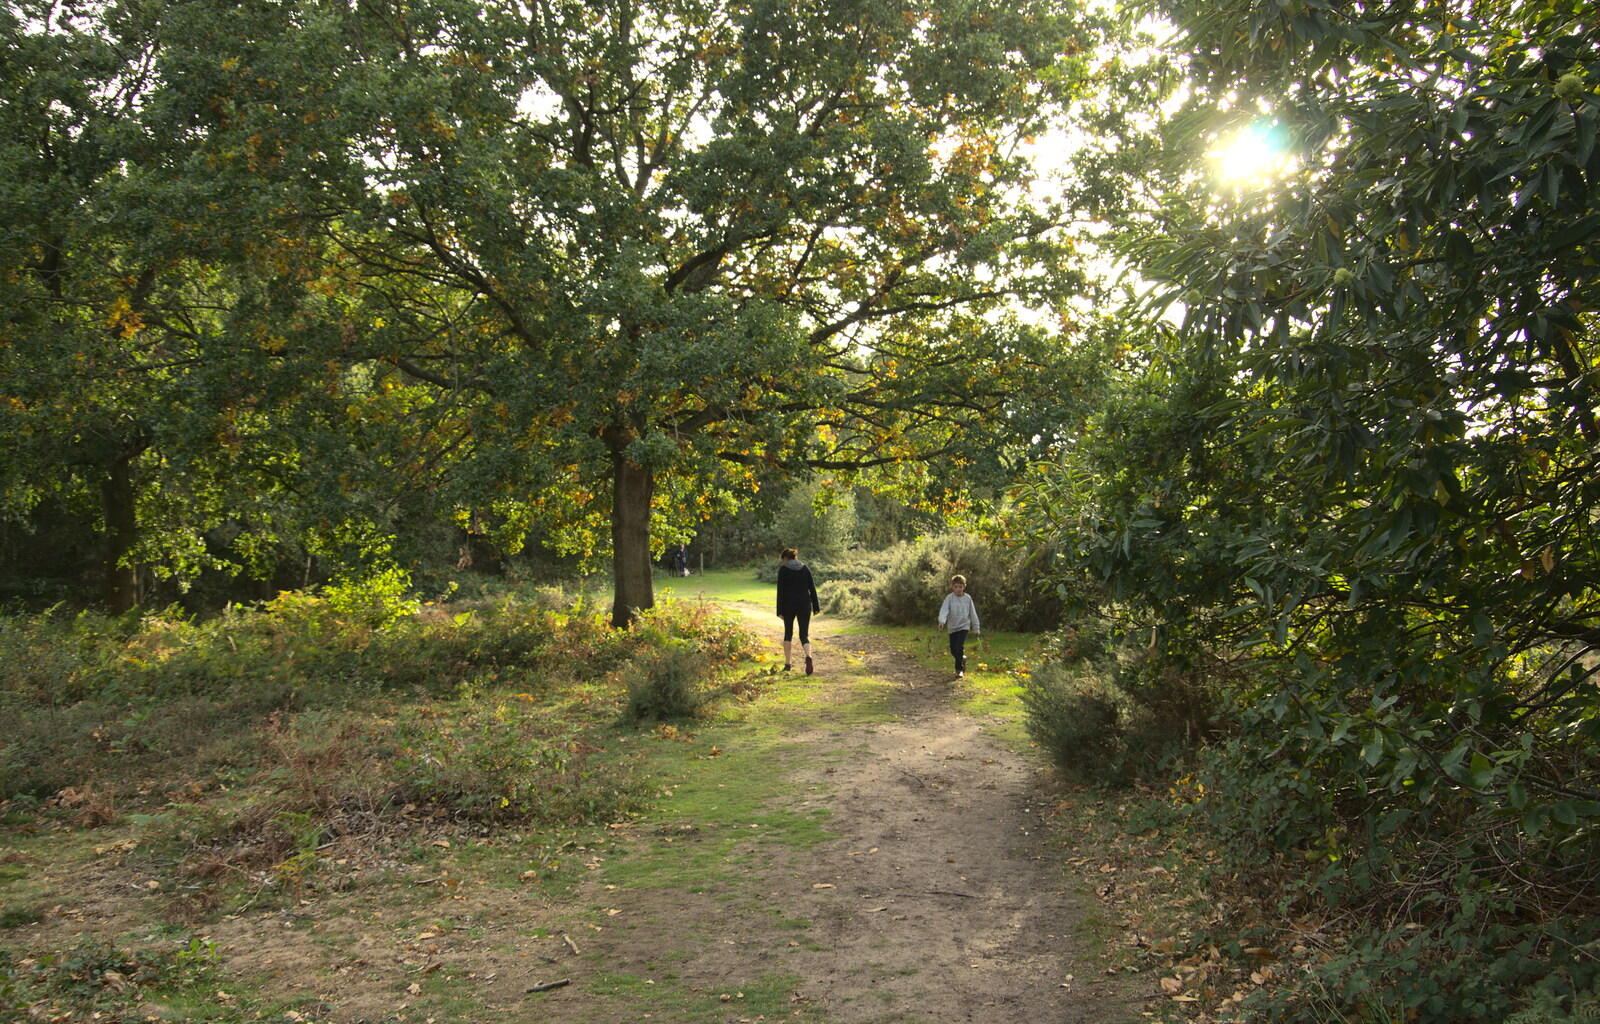 Isobel and Fred in the autumn sun from Evidence of Autumn: Geocaching on Knettishall Heath, Suffolk - 7th October 2018